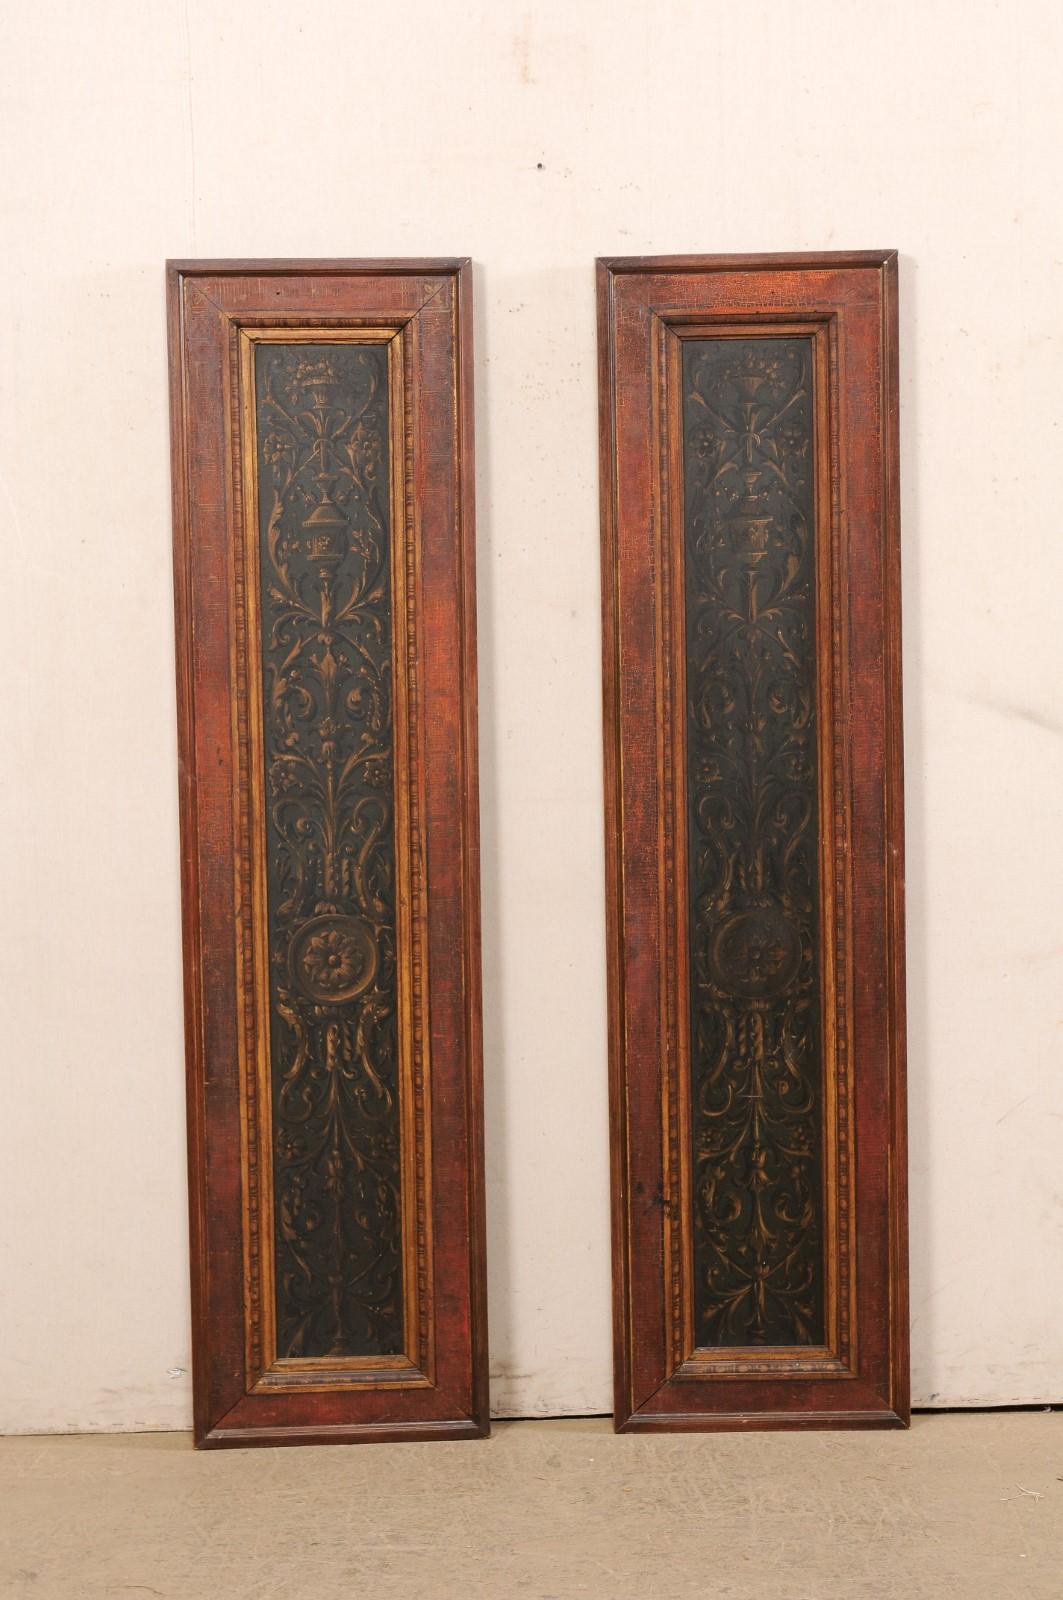 French pair of carved-wood decorative wall panels from the 19th century. This antique pair of wall ornaments from France are each rectangular in shape, with a height over over 6 foot tall, and feature a hand-painted center panel in a beautiful